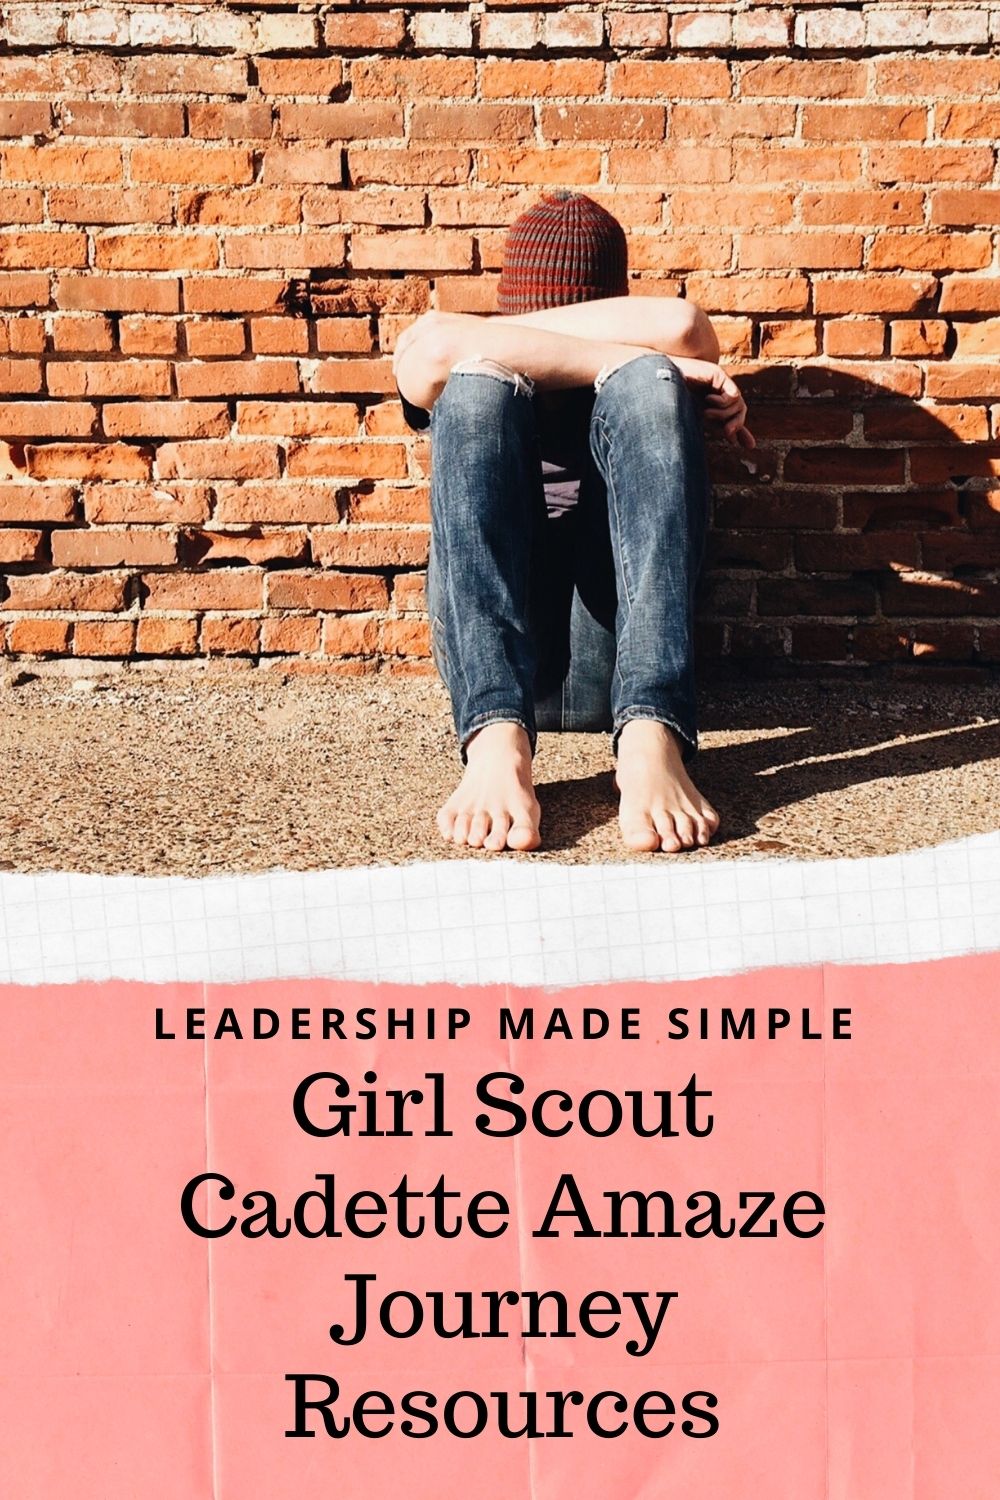 cadette amaze journey in a day